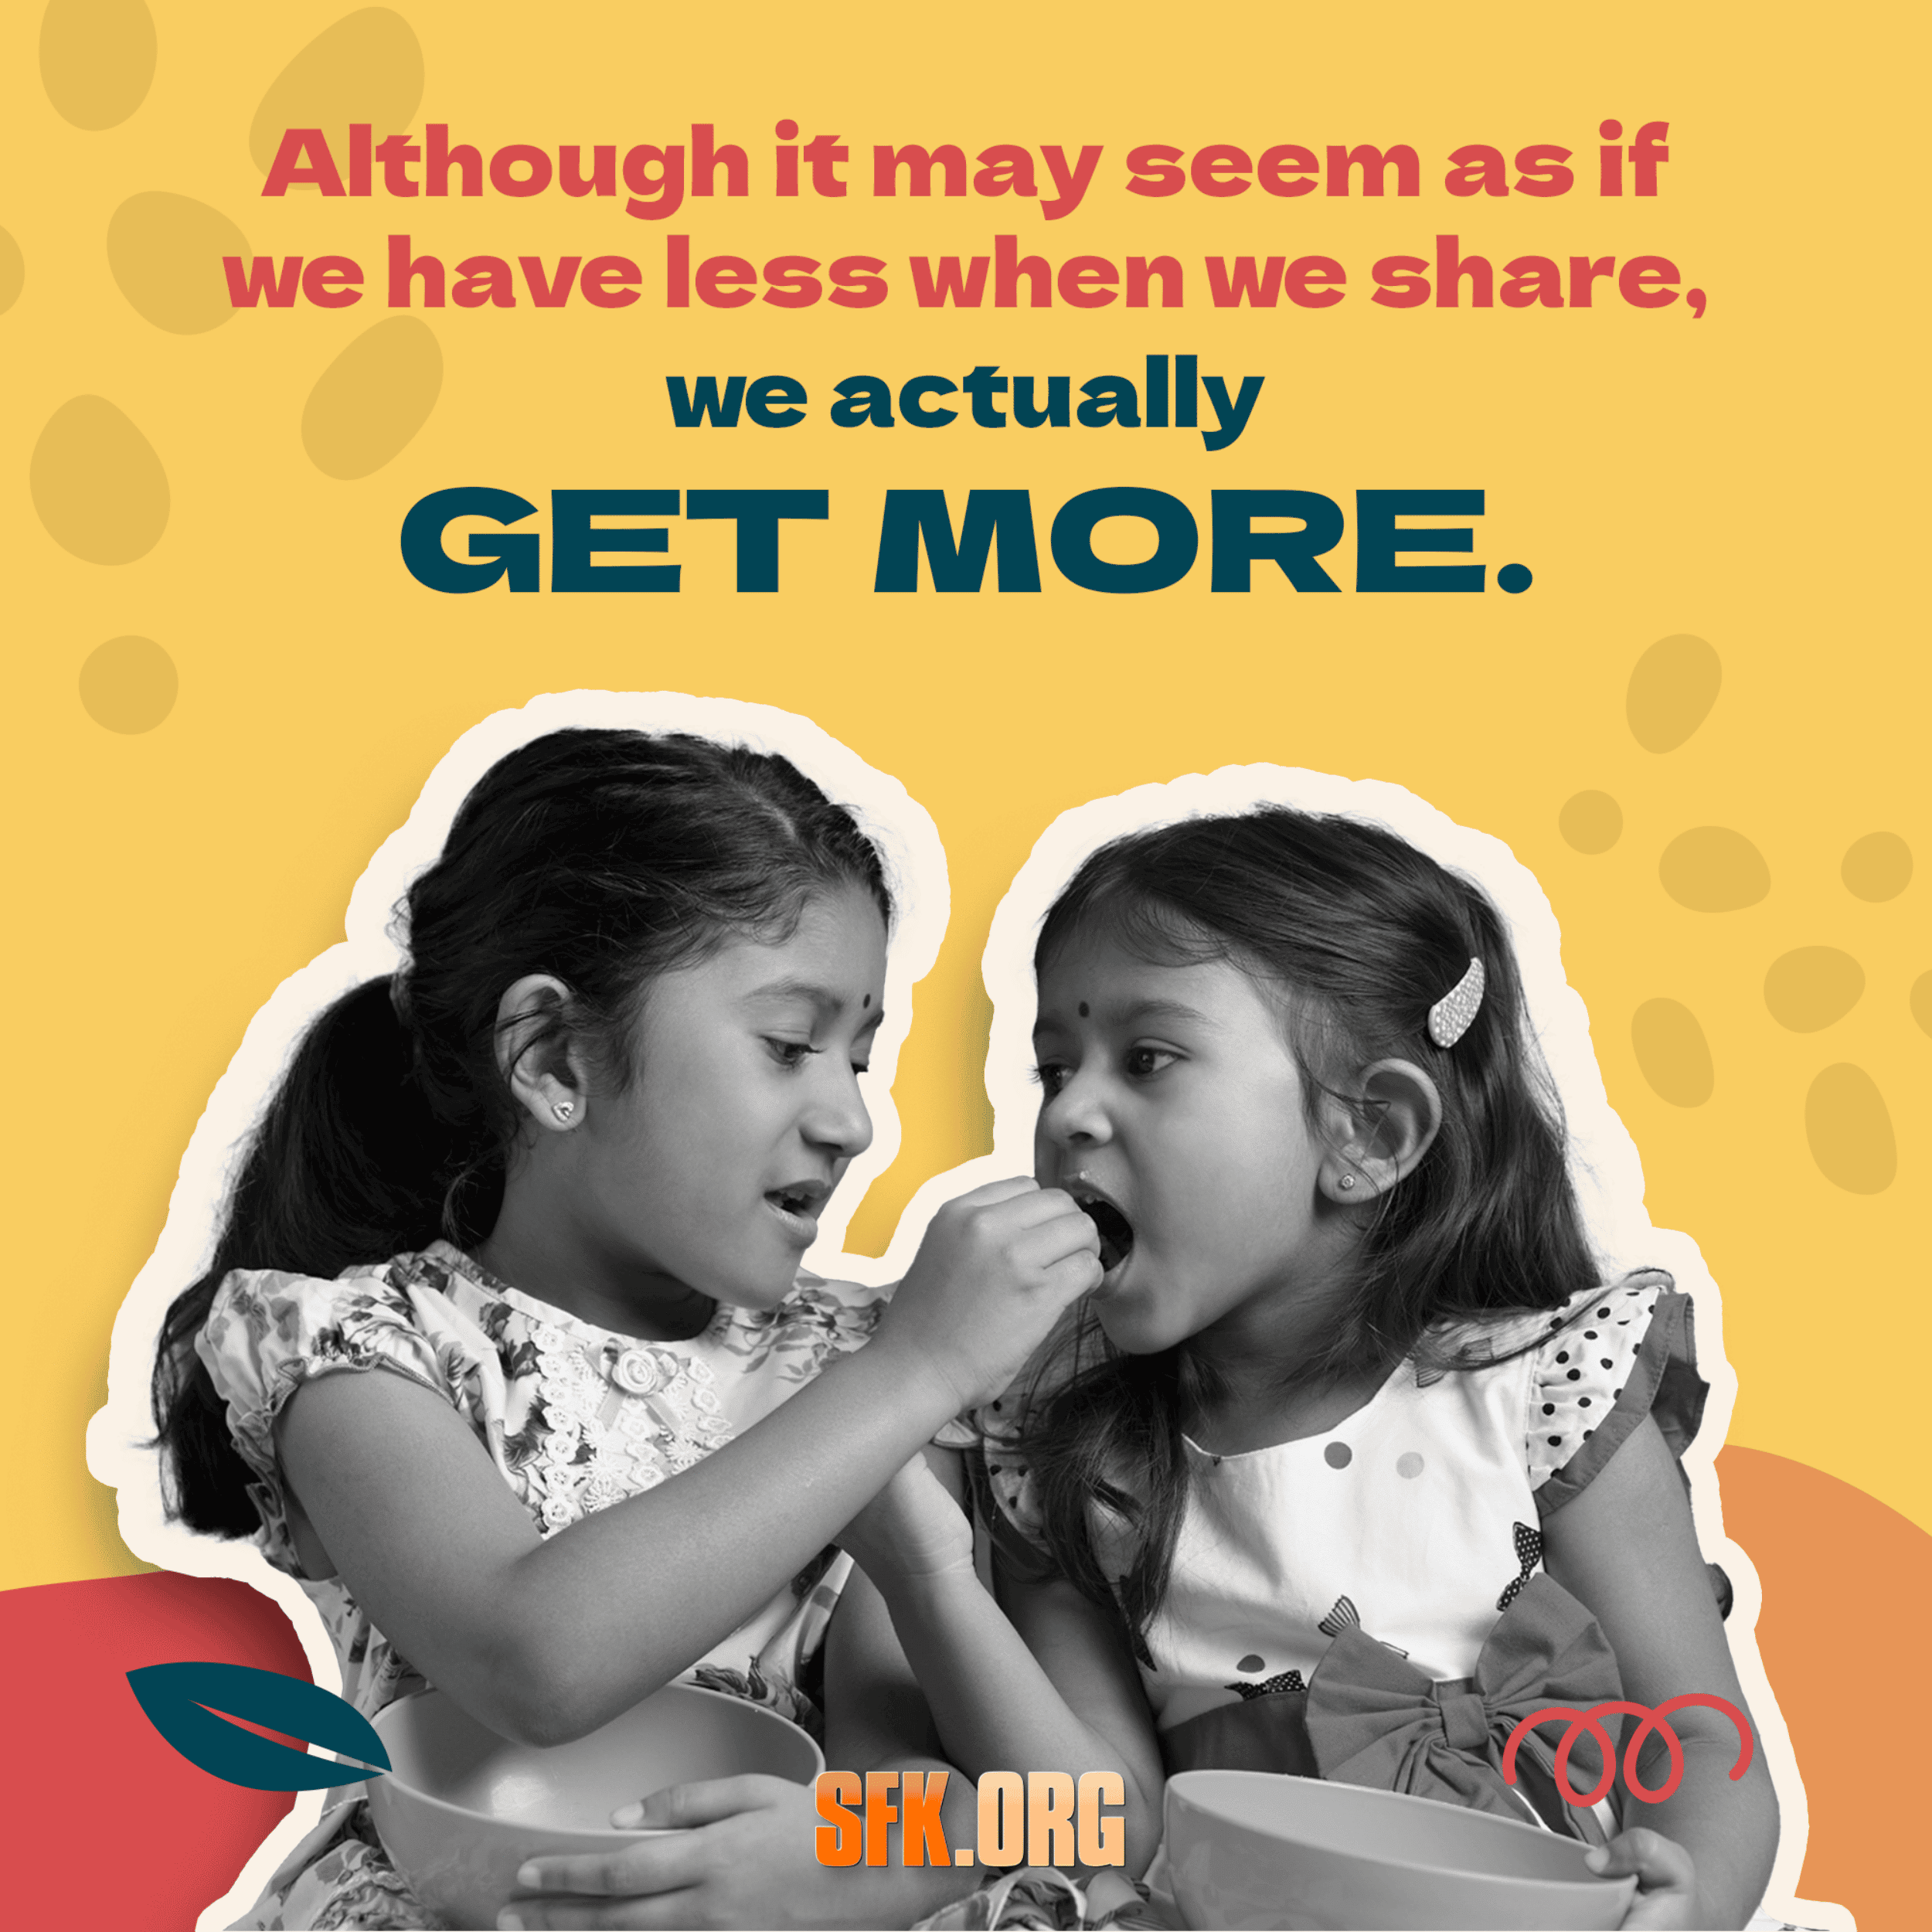 Although it may seem as if we have less when we share, we actually GET MORE.